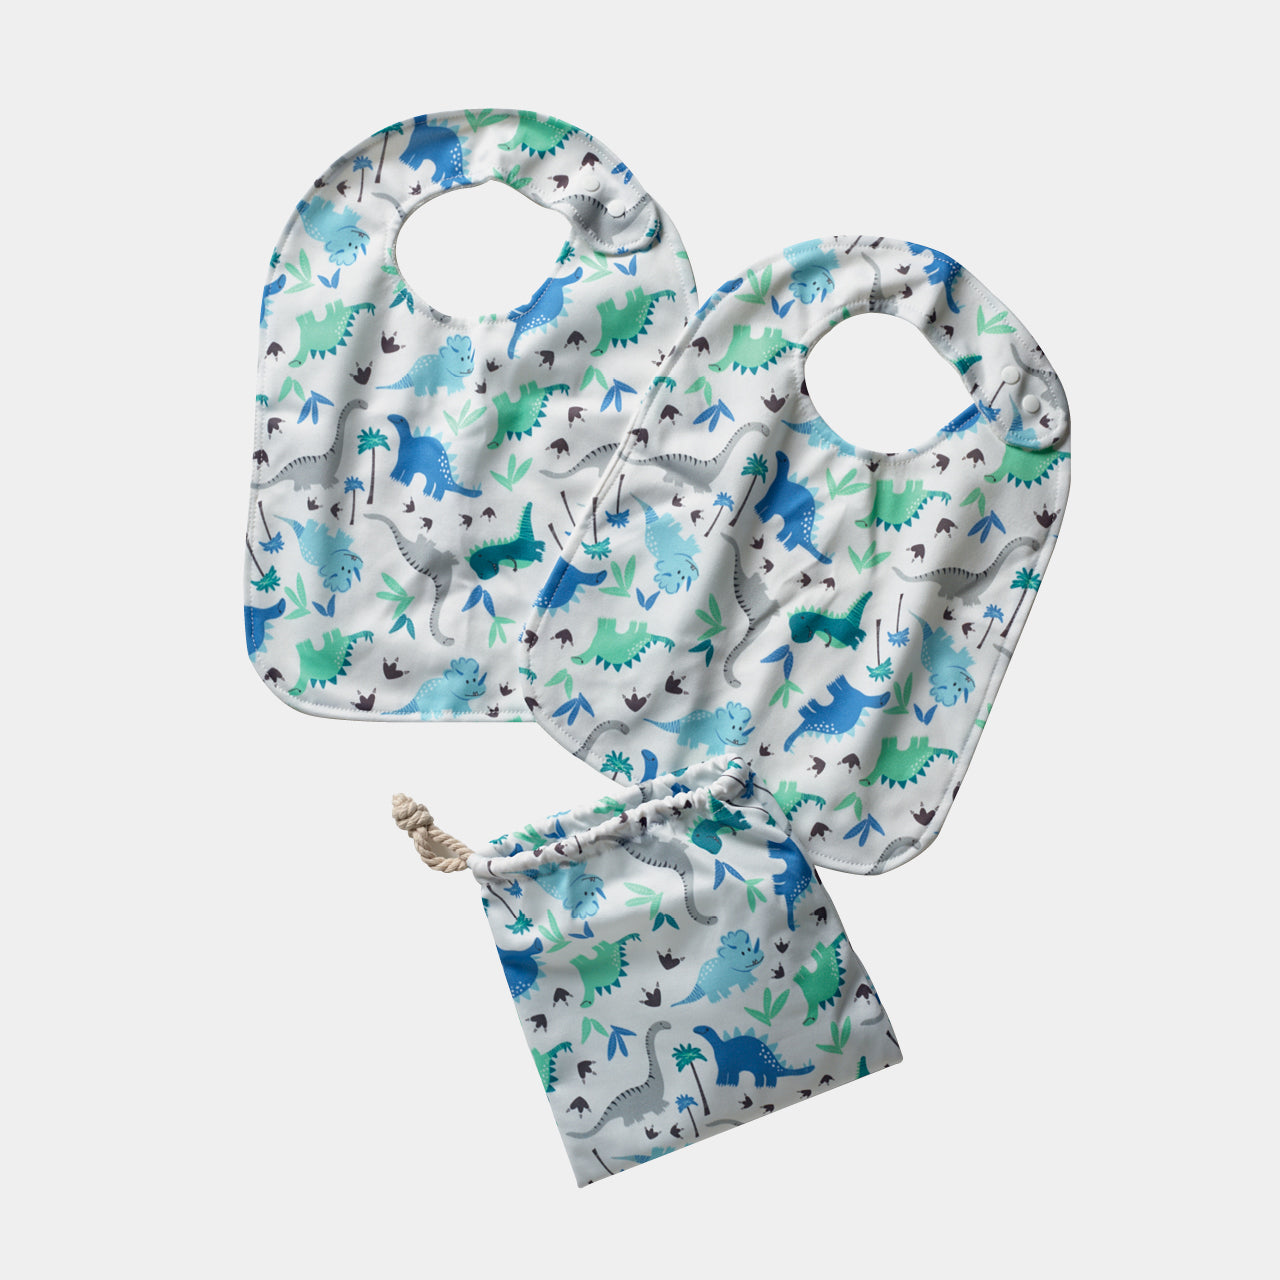 Dinosaur Bibs and bag on a white background